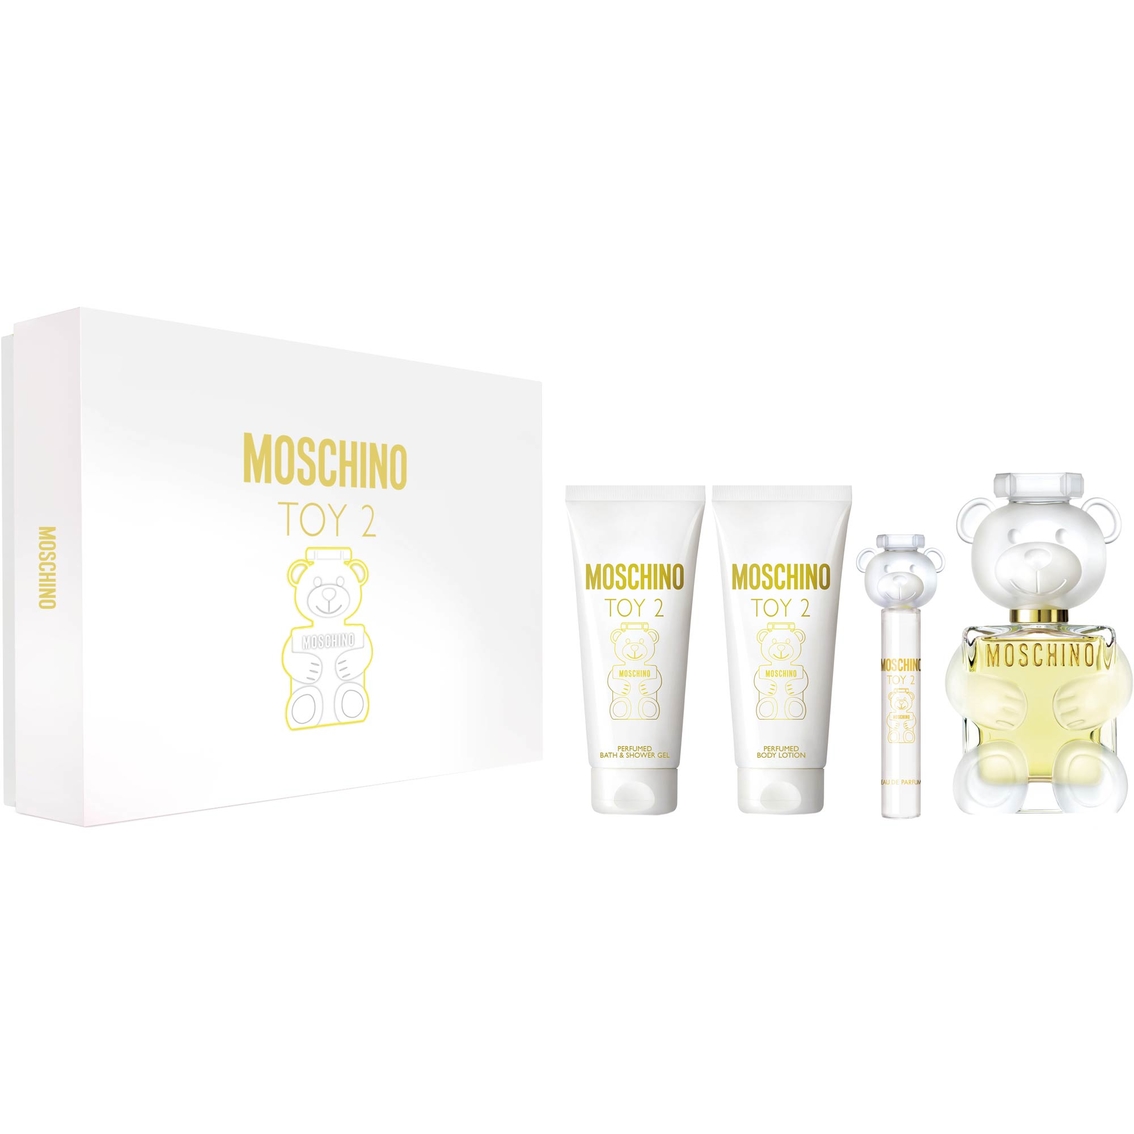 Moschino Toy 2 Gift 4 pc. Set - Image 2 of 2